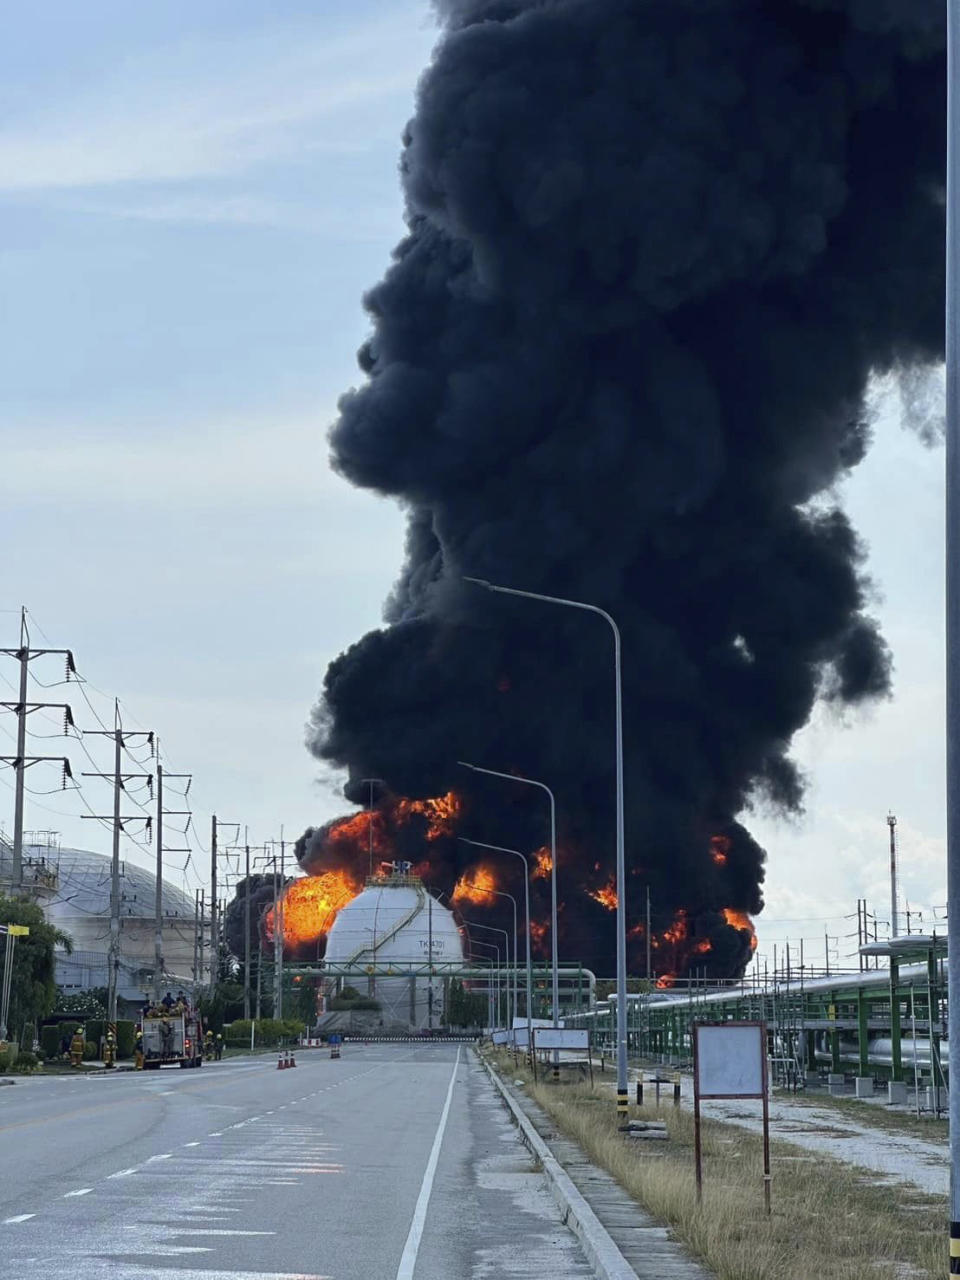 Black smoke billows after an explosion at the gas storage tanks in an industrial area in Rayong province, eastern of Thailand, Thursday, May 9, 2024. At least one person was killed and several others injured after a huge fire broke out at gas storage tanks. (Fire & Rescue Thailand via AP)